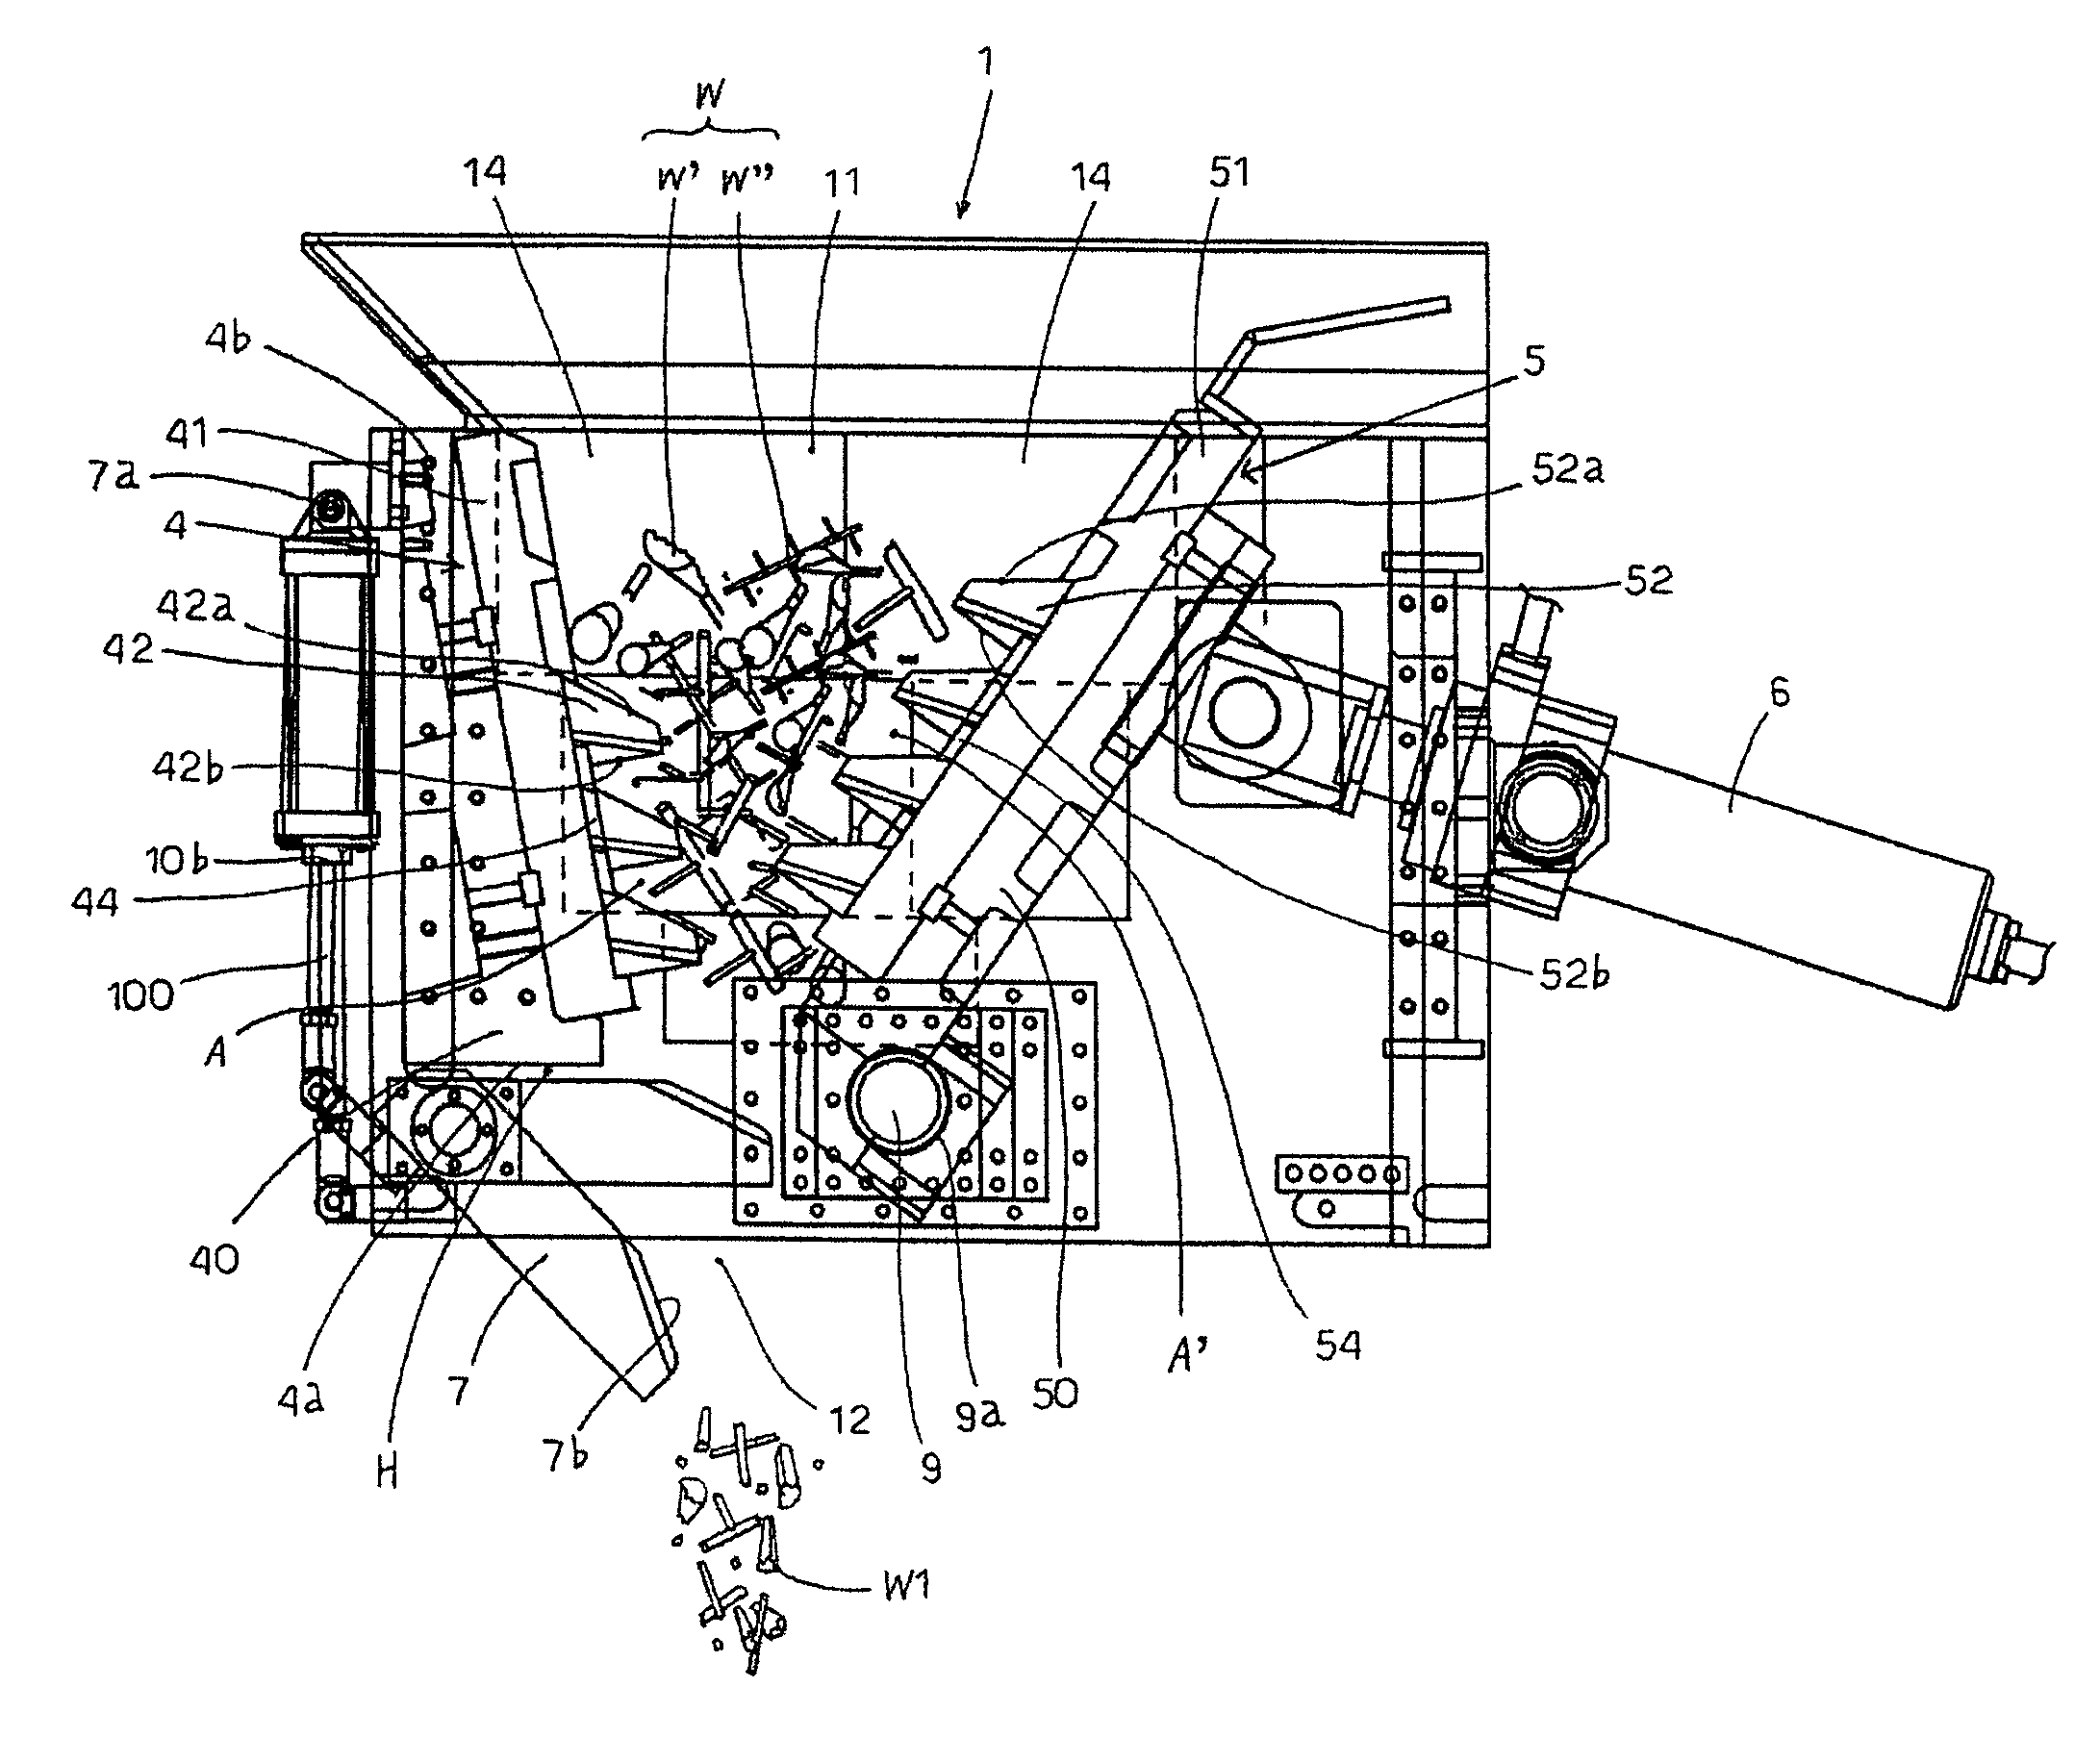 Other side tool support base and/or other side tool post mounted to casting breaking apparatus, and bearing of the other side tool support base